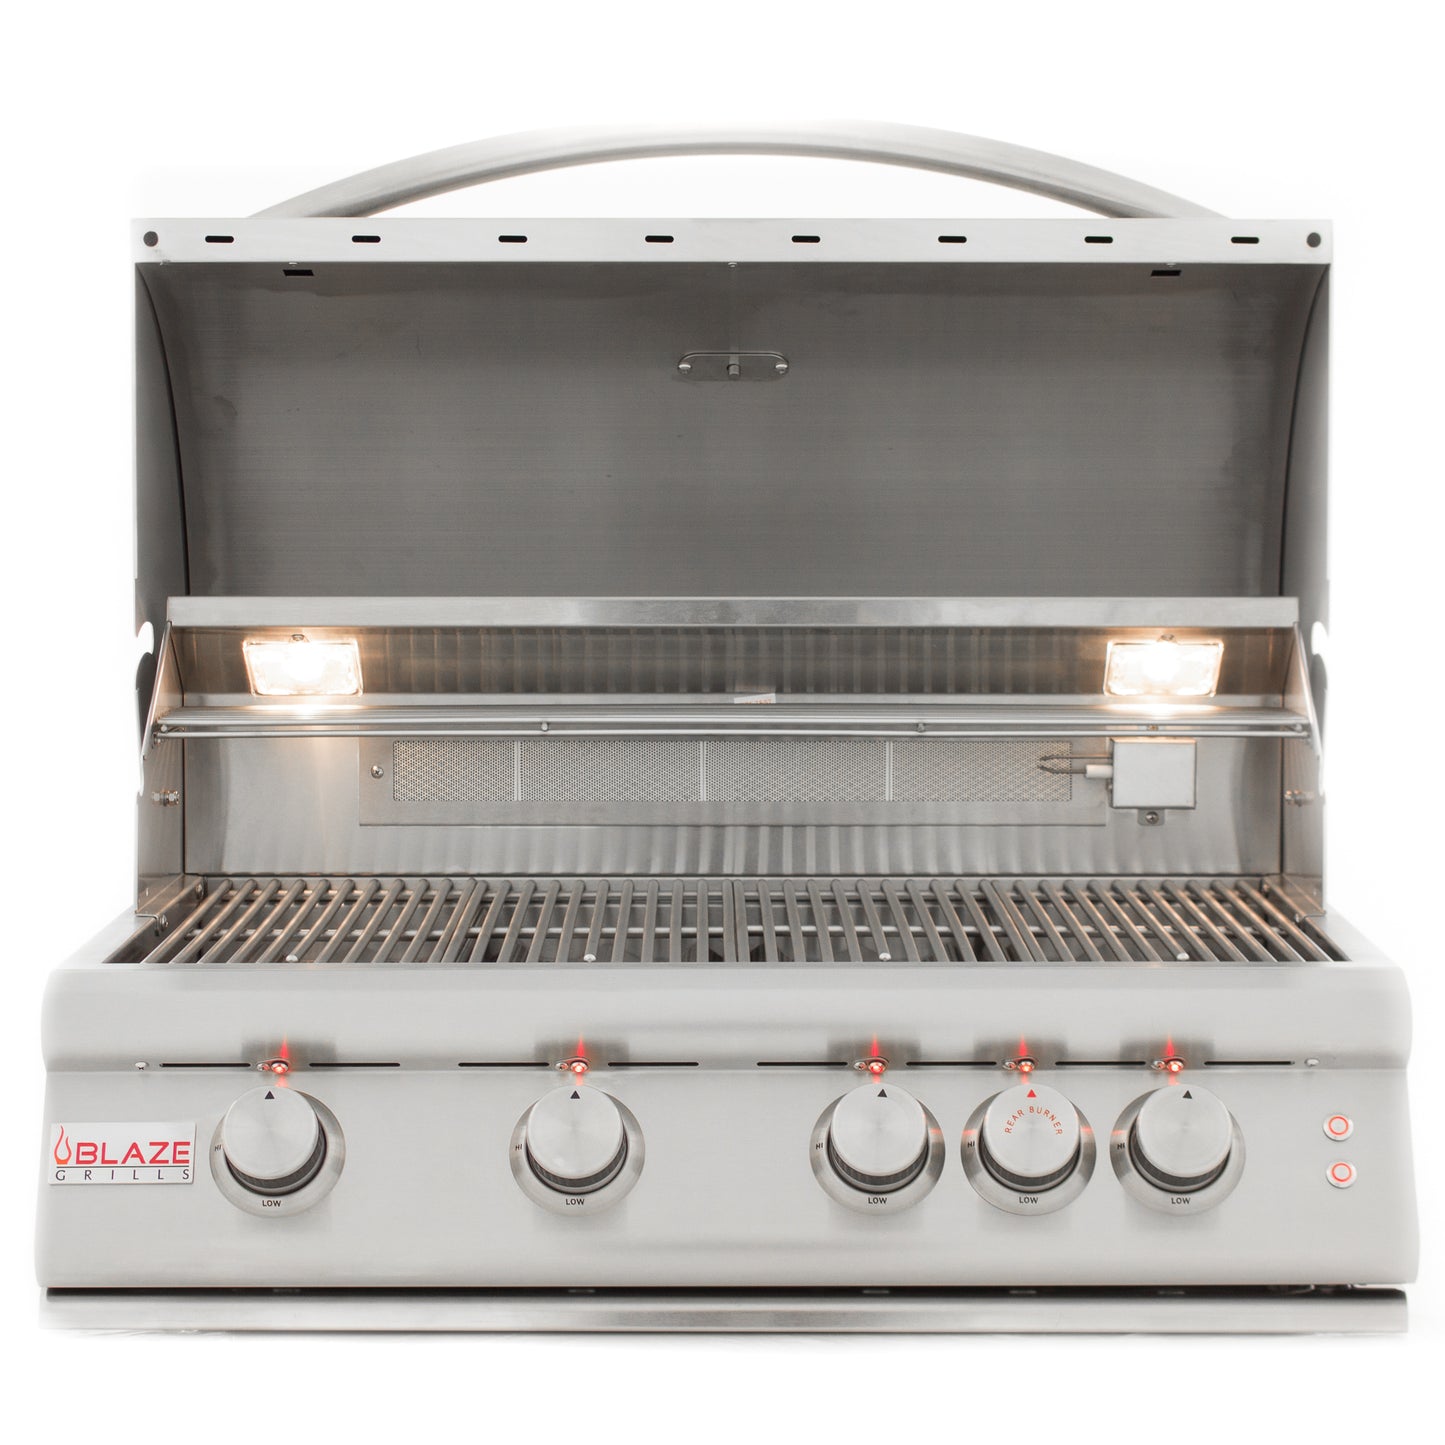 Blaze 4 LTE - 32" Grill with Lights NG